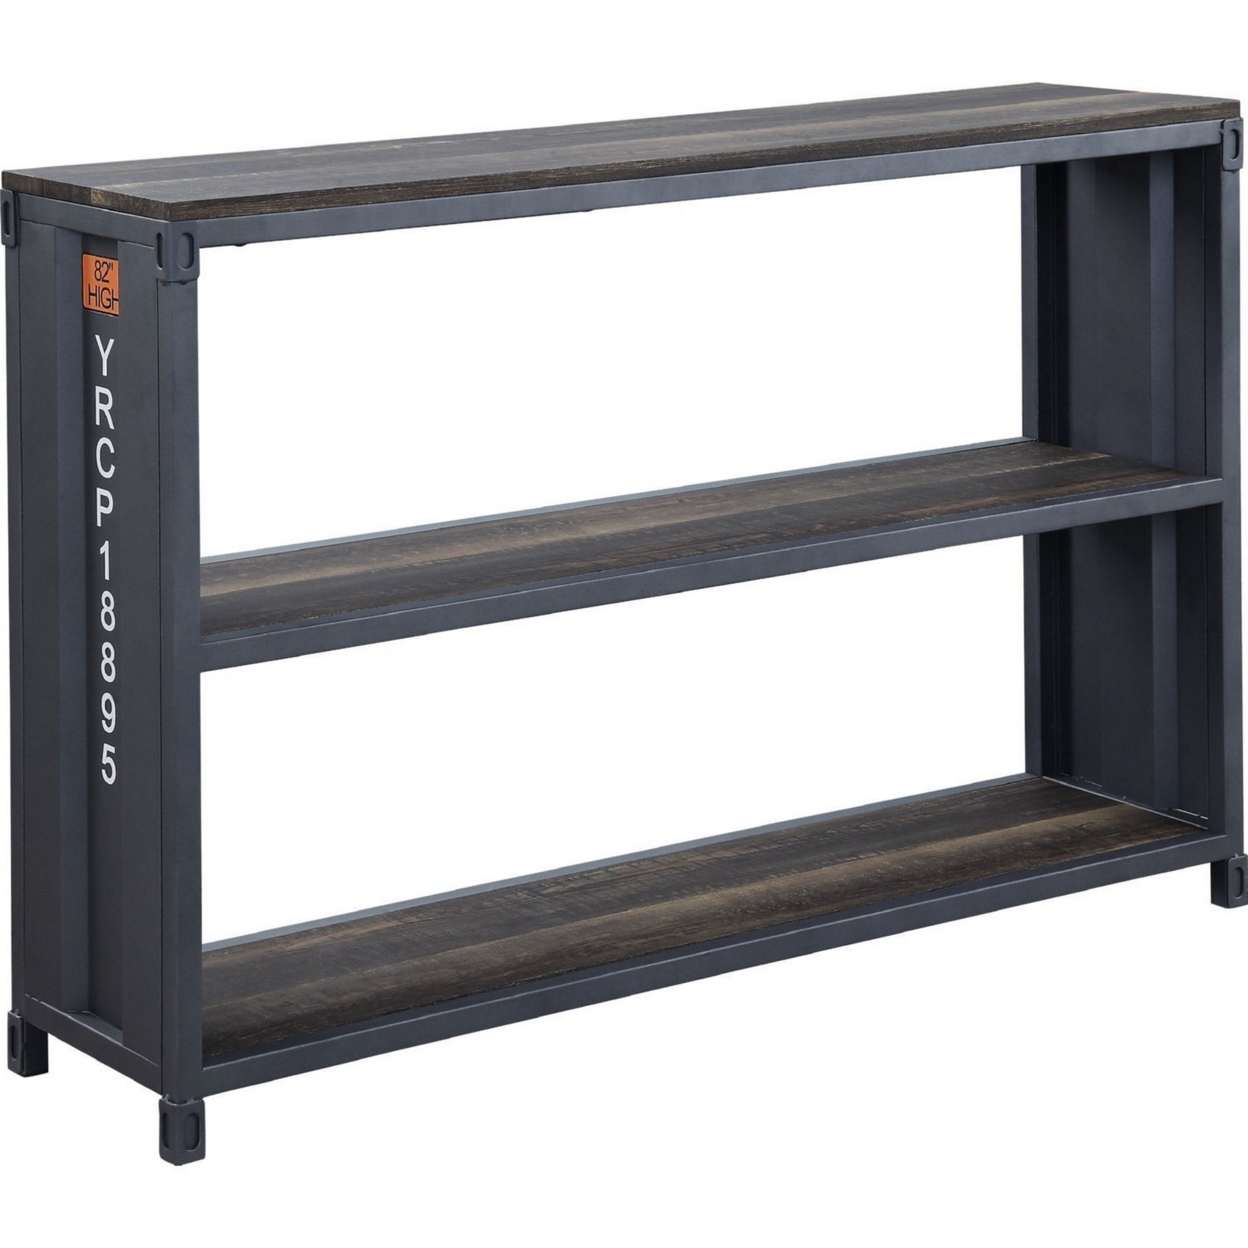 MDF 3 Tier Bookshelf With Metal Container Style, Gray And Brown- Saltoro Sherpi